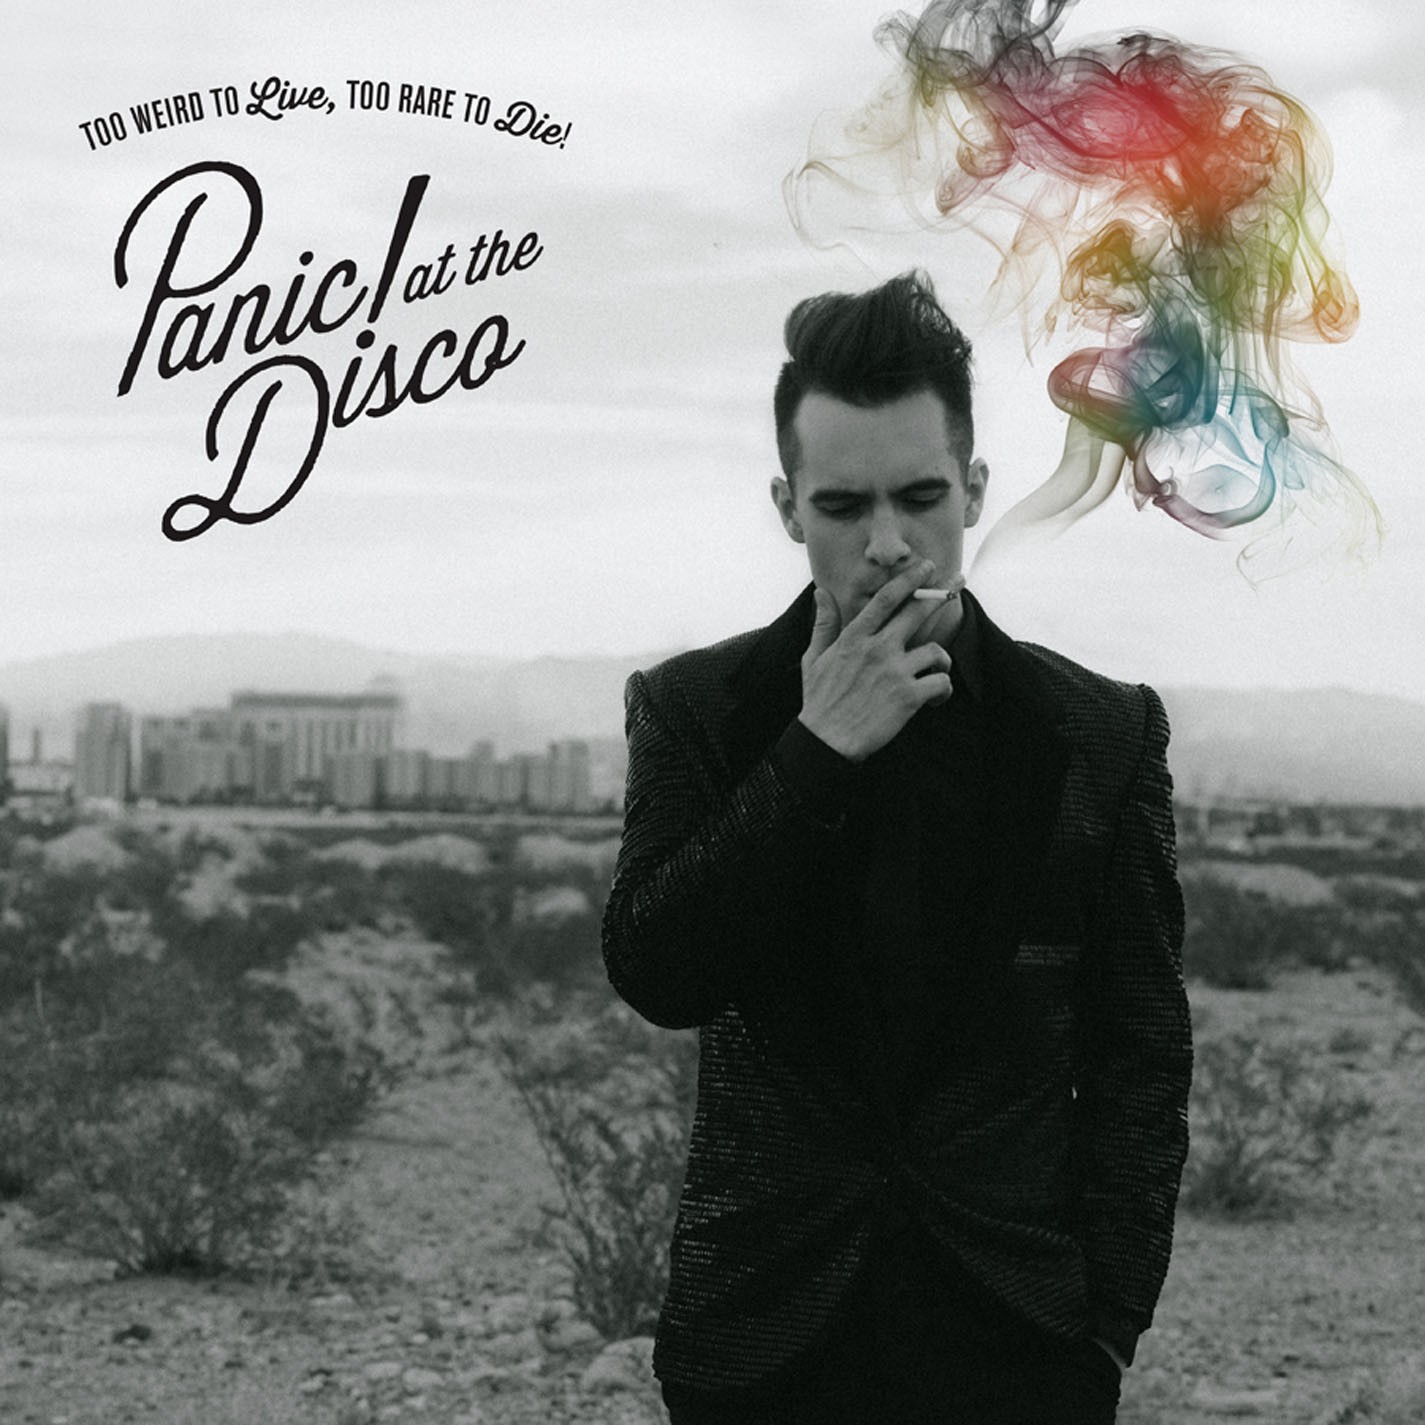 Panic At The Disco - Too Weird To Live, Too Rare To Die! Vinyl LP